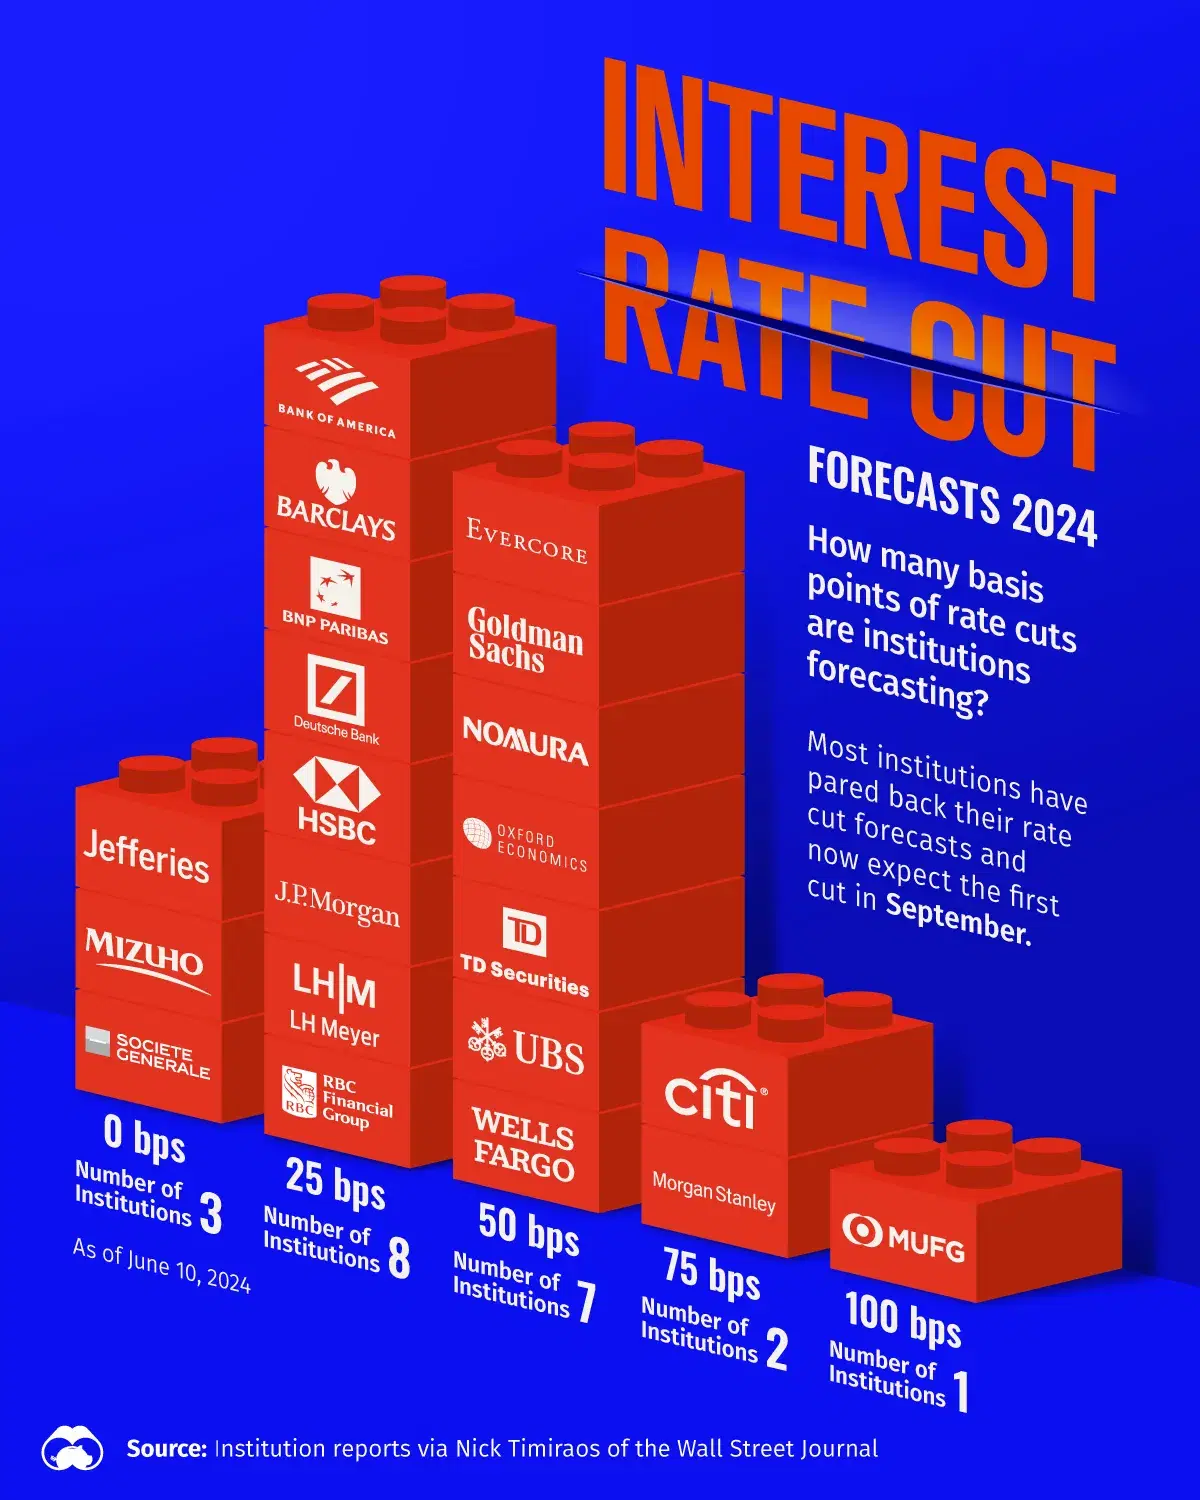 Mid-Year Interest Rate Cut Forecasts for 2024